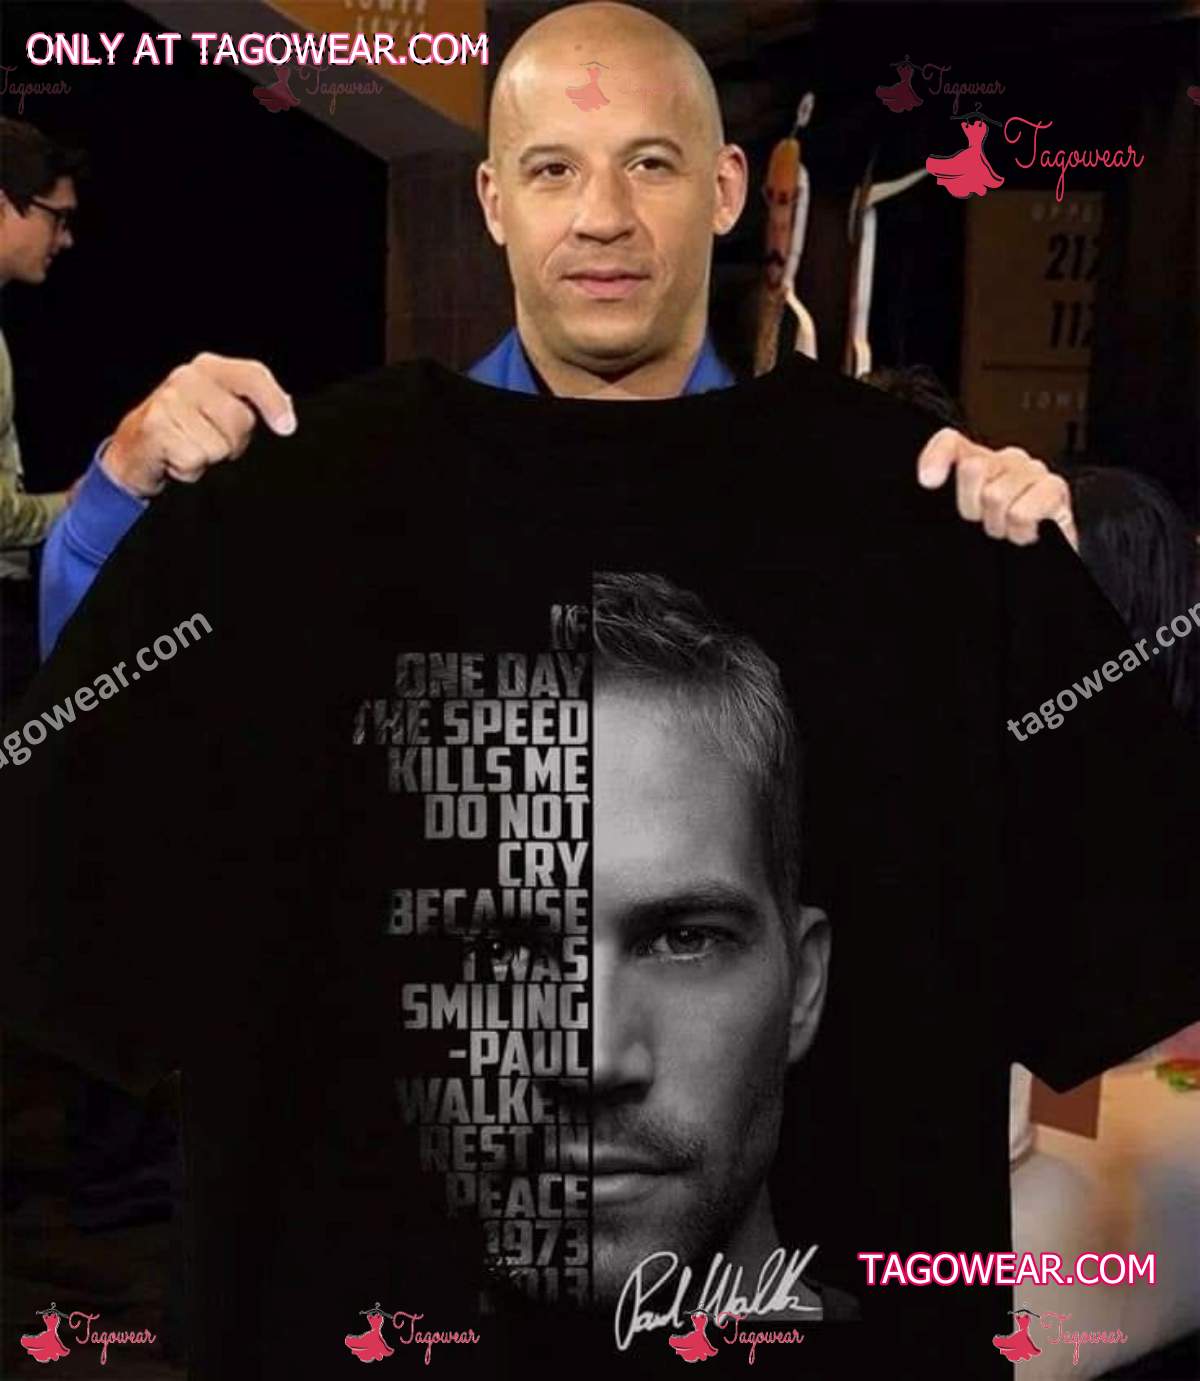 Paul Walker If One Day The Speed Kills Me Shirt